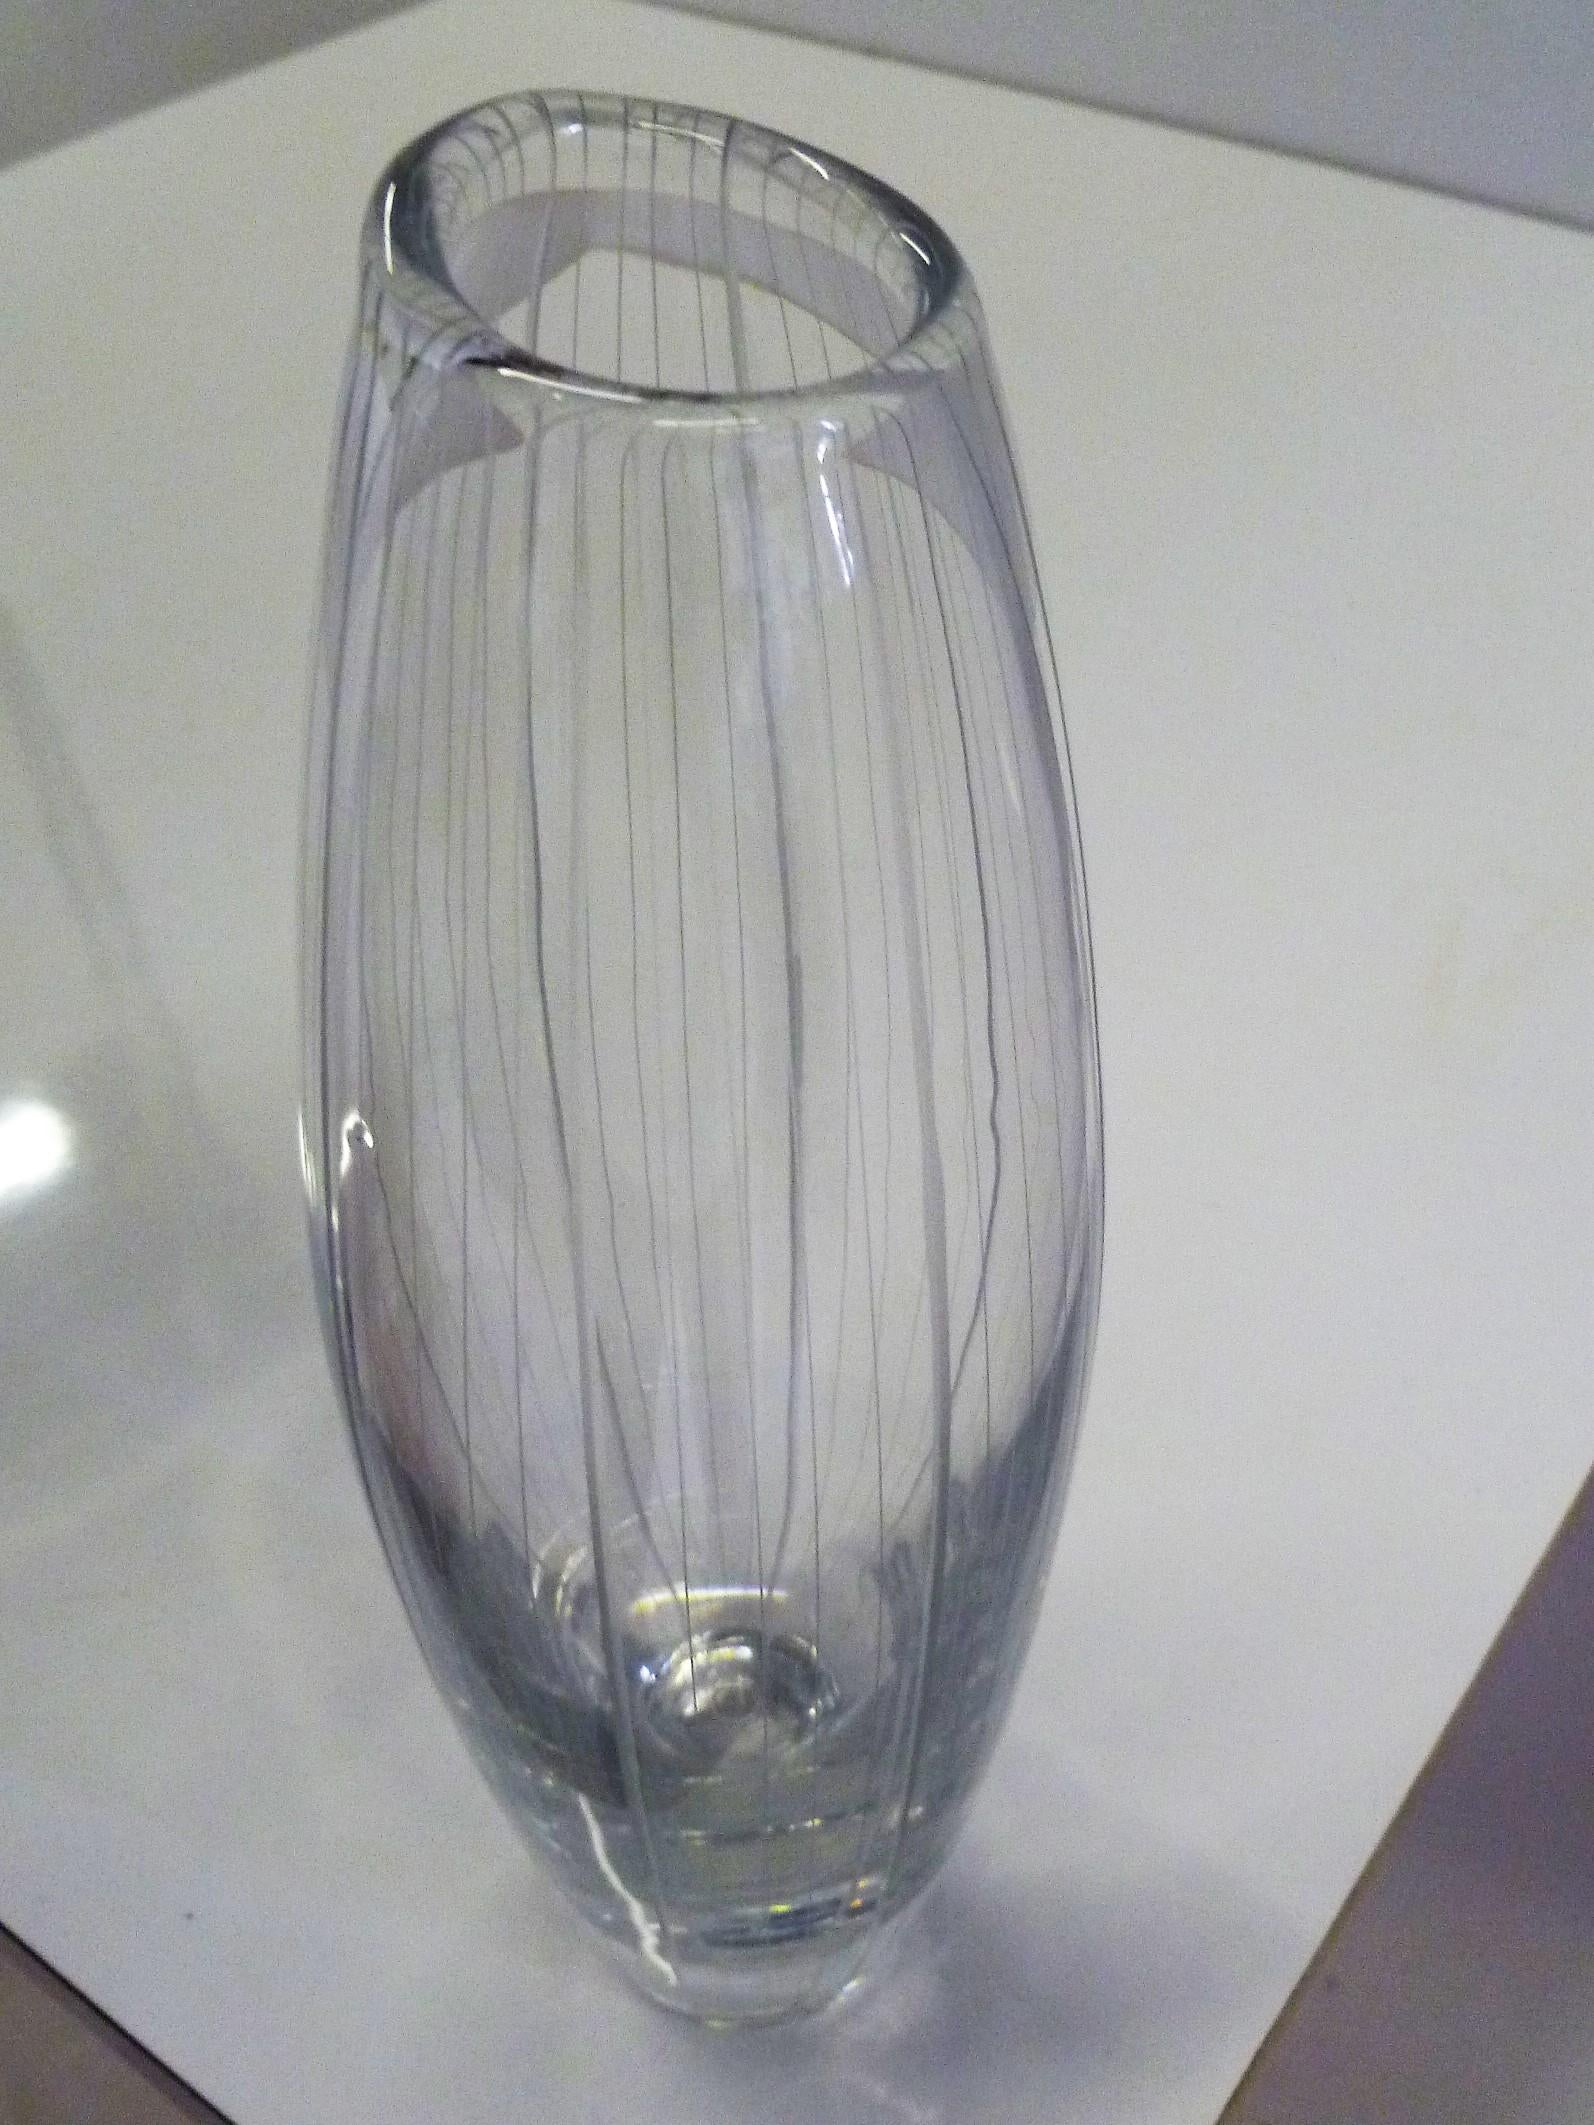 Striped Mid-Century Modern engraved mouth blown clear glass vase by Vicke Lindstrand, 1904-1983 Sweden, for Kosta in 1956.
In a cylindrical shape with augmented middle and a slanted mouth. The vertical stripes are engraved in a pattern of one thick